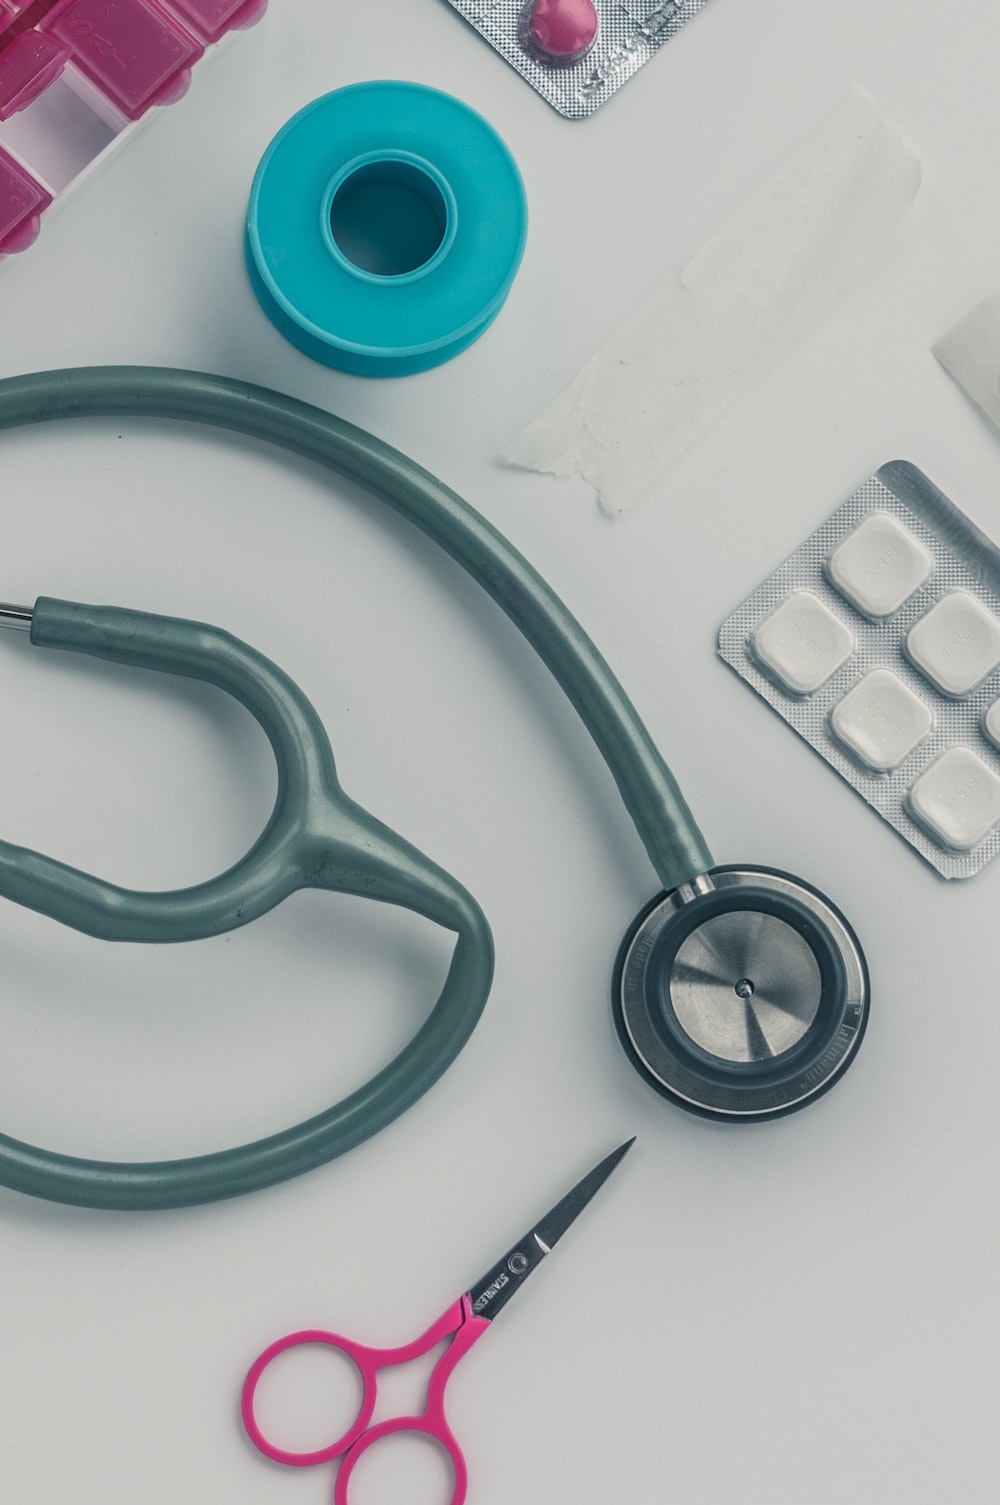 Cute Stethoscope Wallpapers